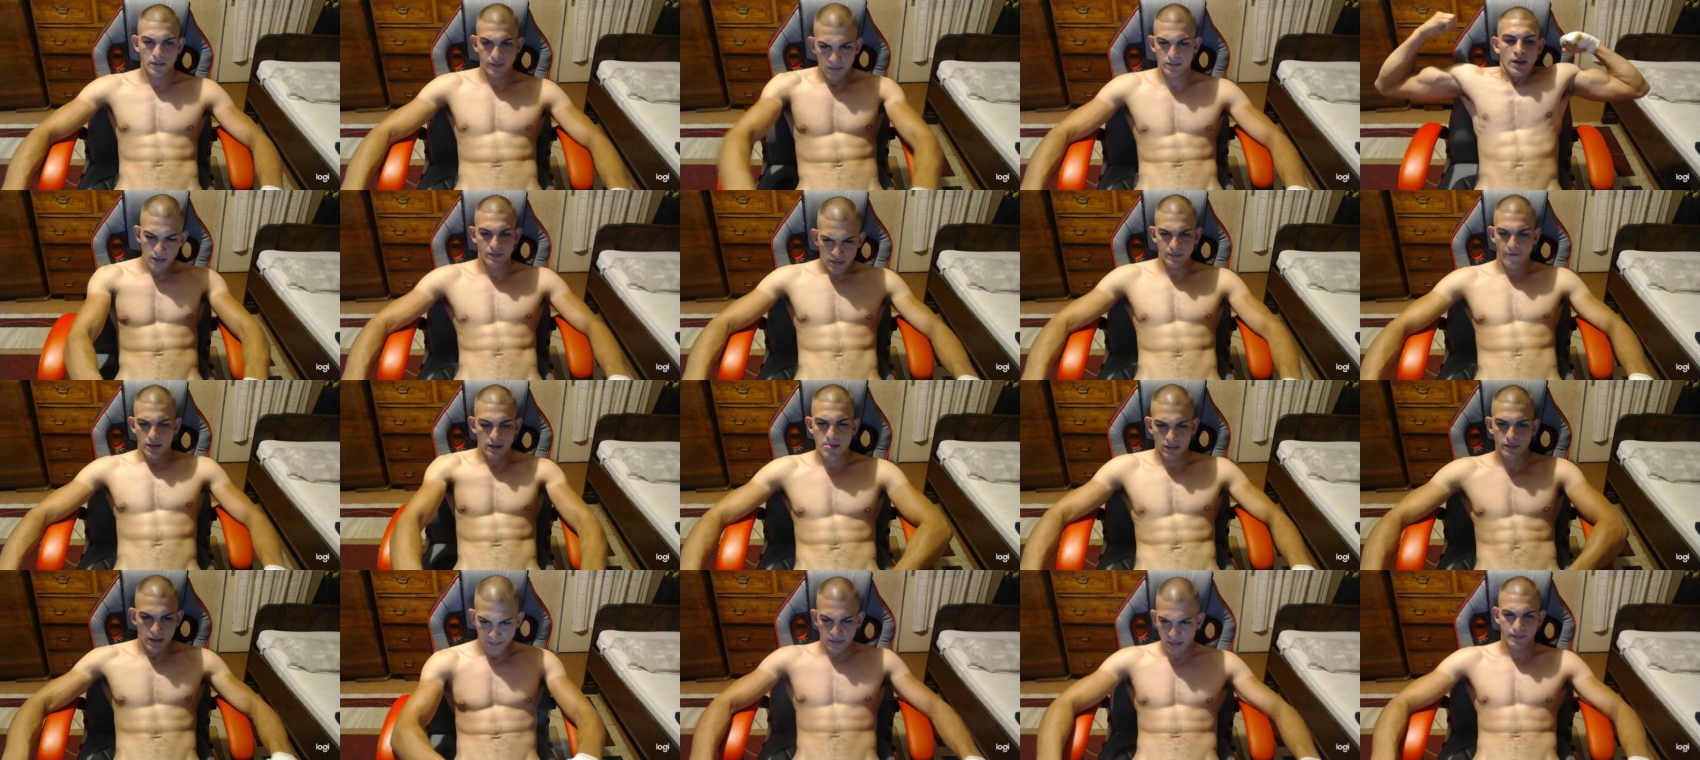 musclesexygod  28-07-2022 Males hardcore